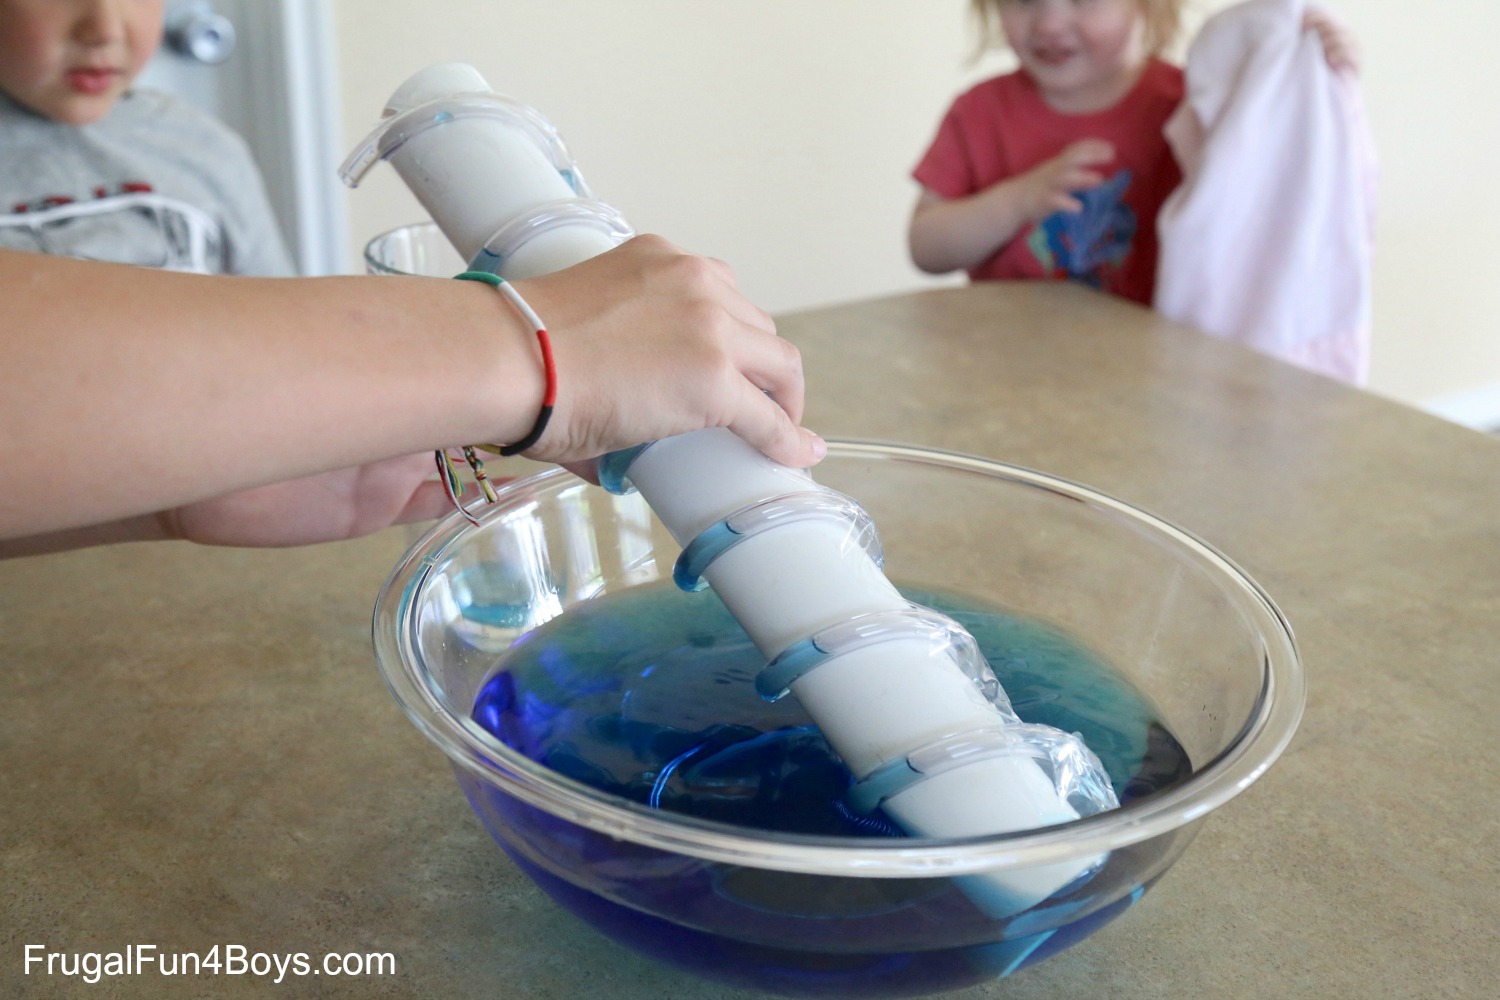 Simple Machines Science Lesson: Demonstrate Archimedes' Screw